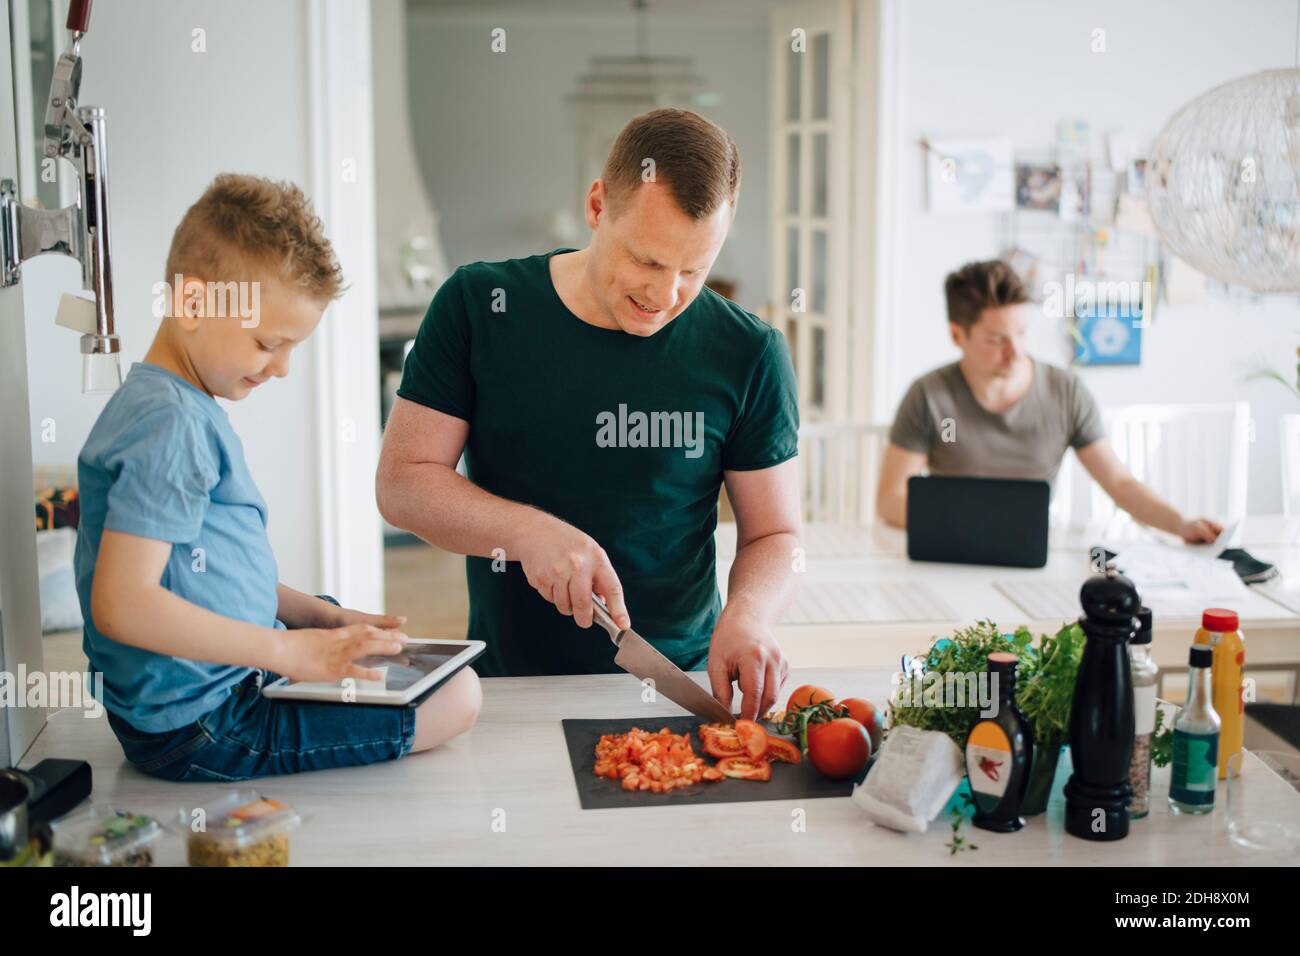 Father cutting tomato while son using digital tablet on kitchen counter Stock Photo